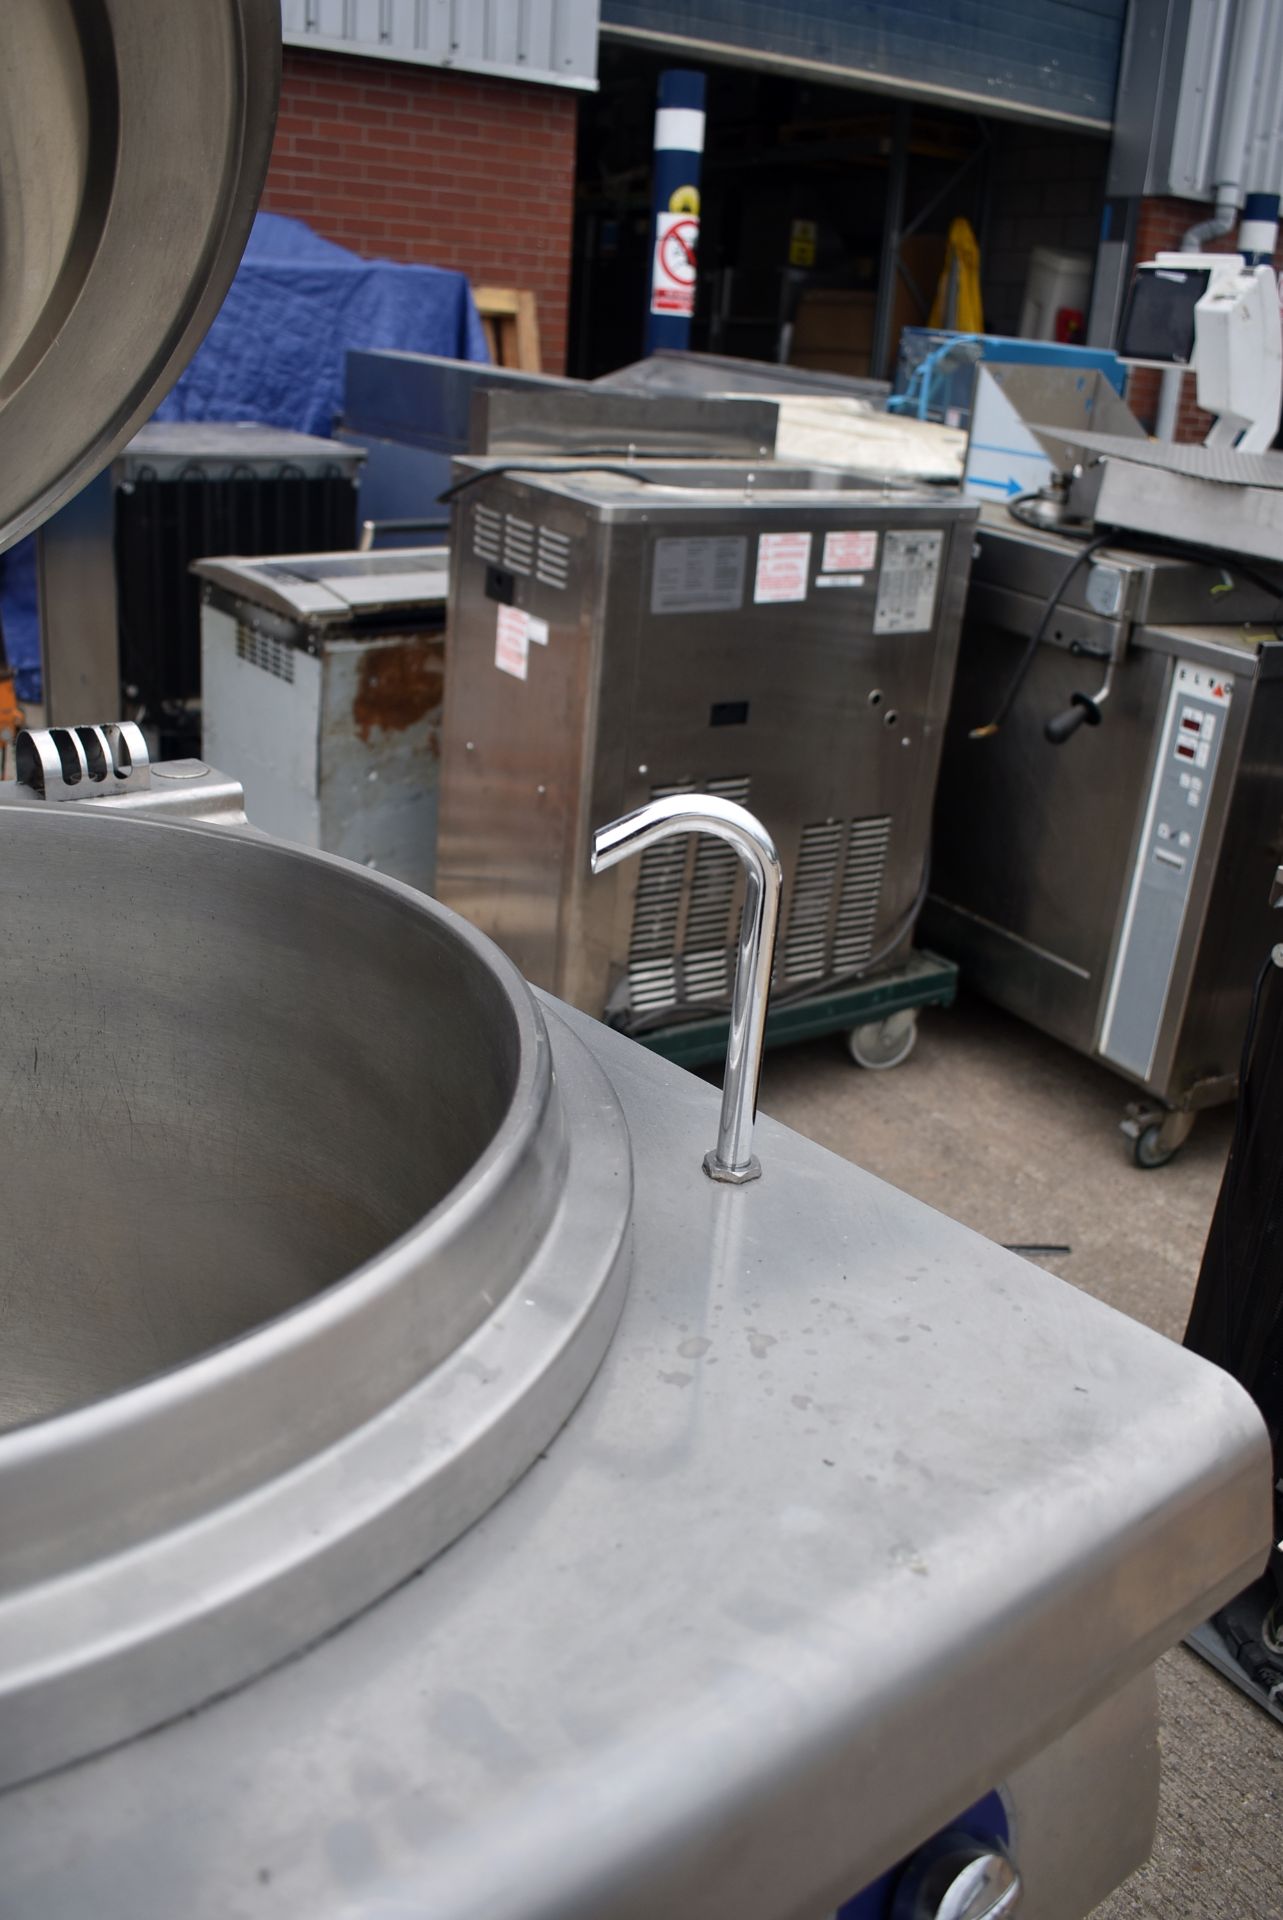 1 x Bonnet Advancia Boiling Pan With Stainless Steel Finish - 3 Phase - RRP: £8,000 - Image 12 of 14